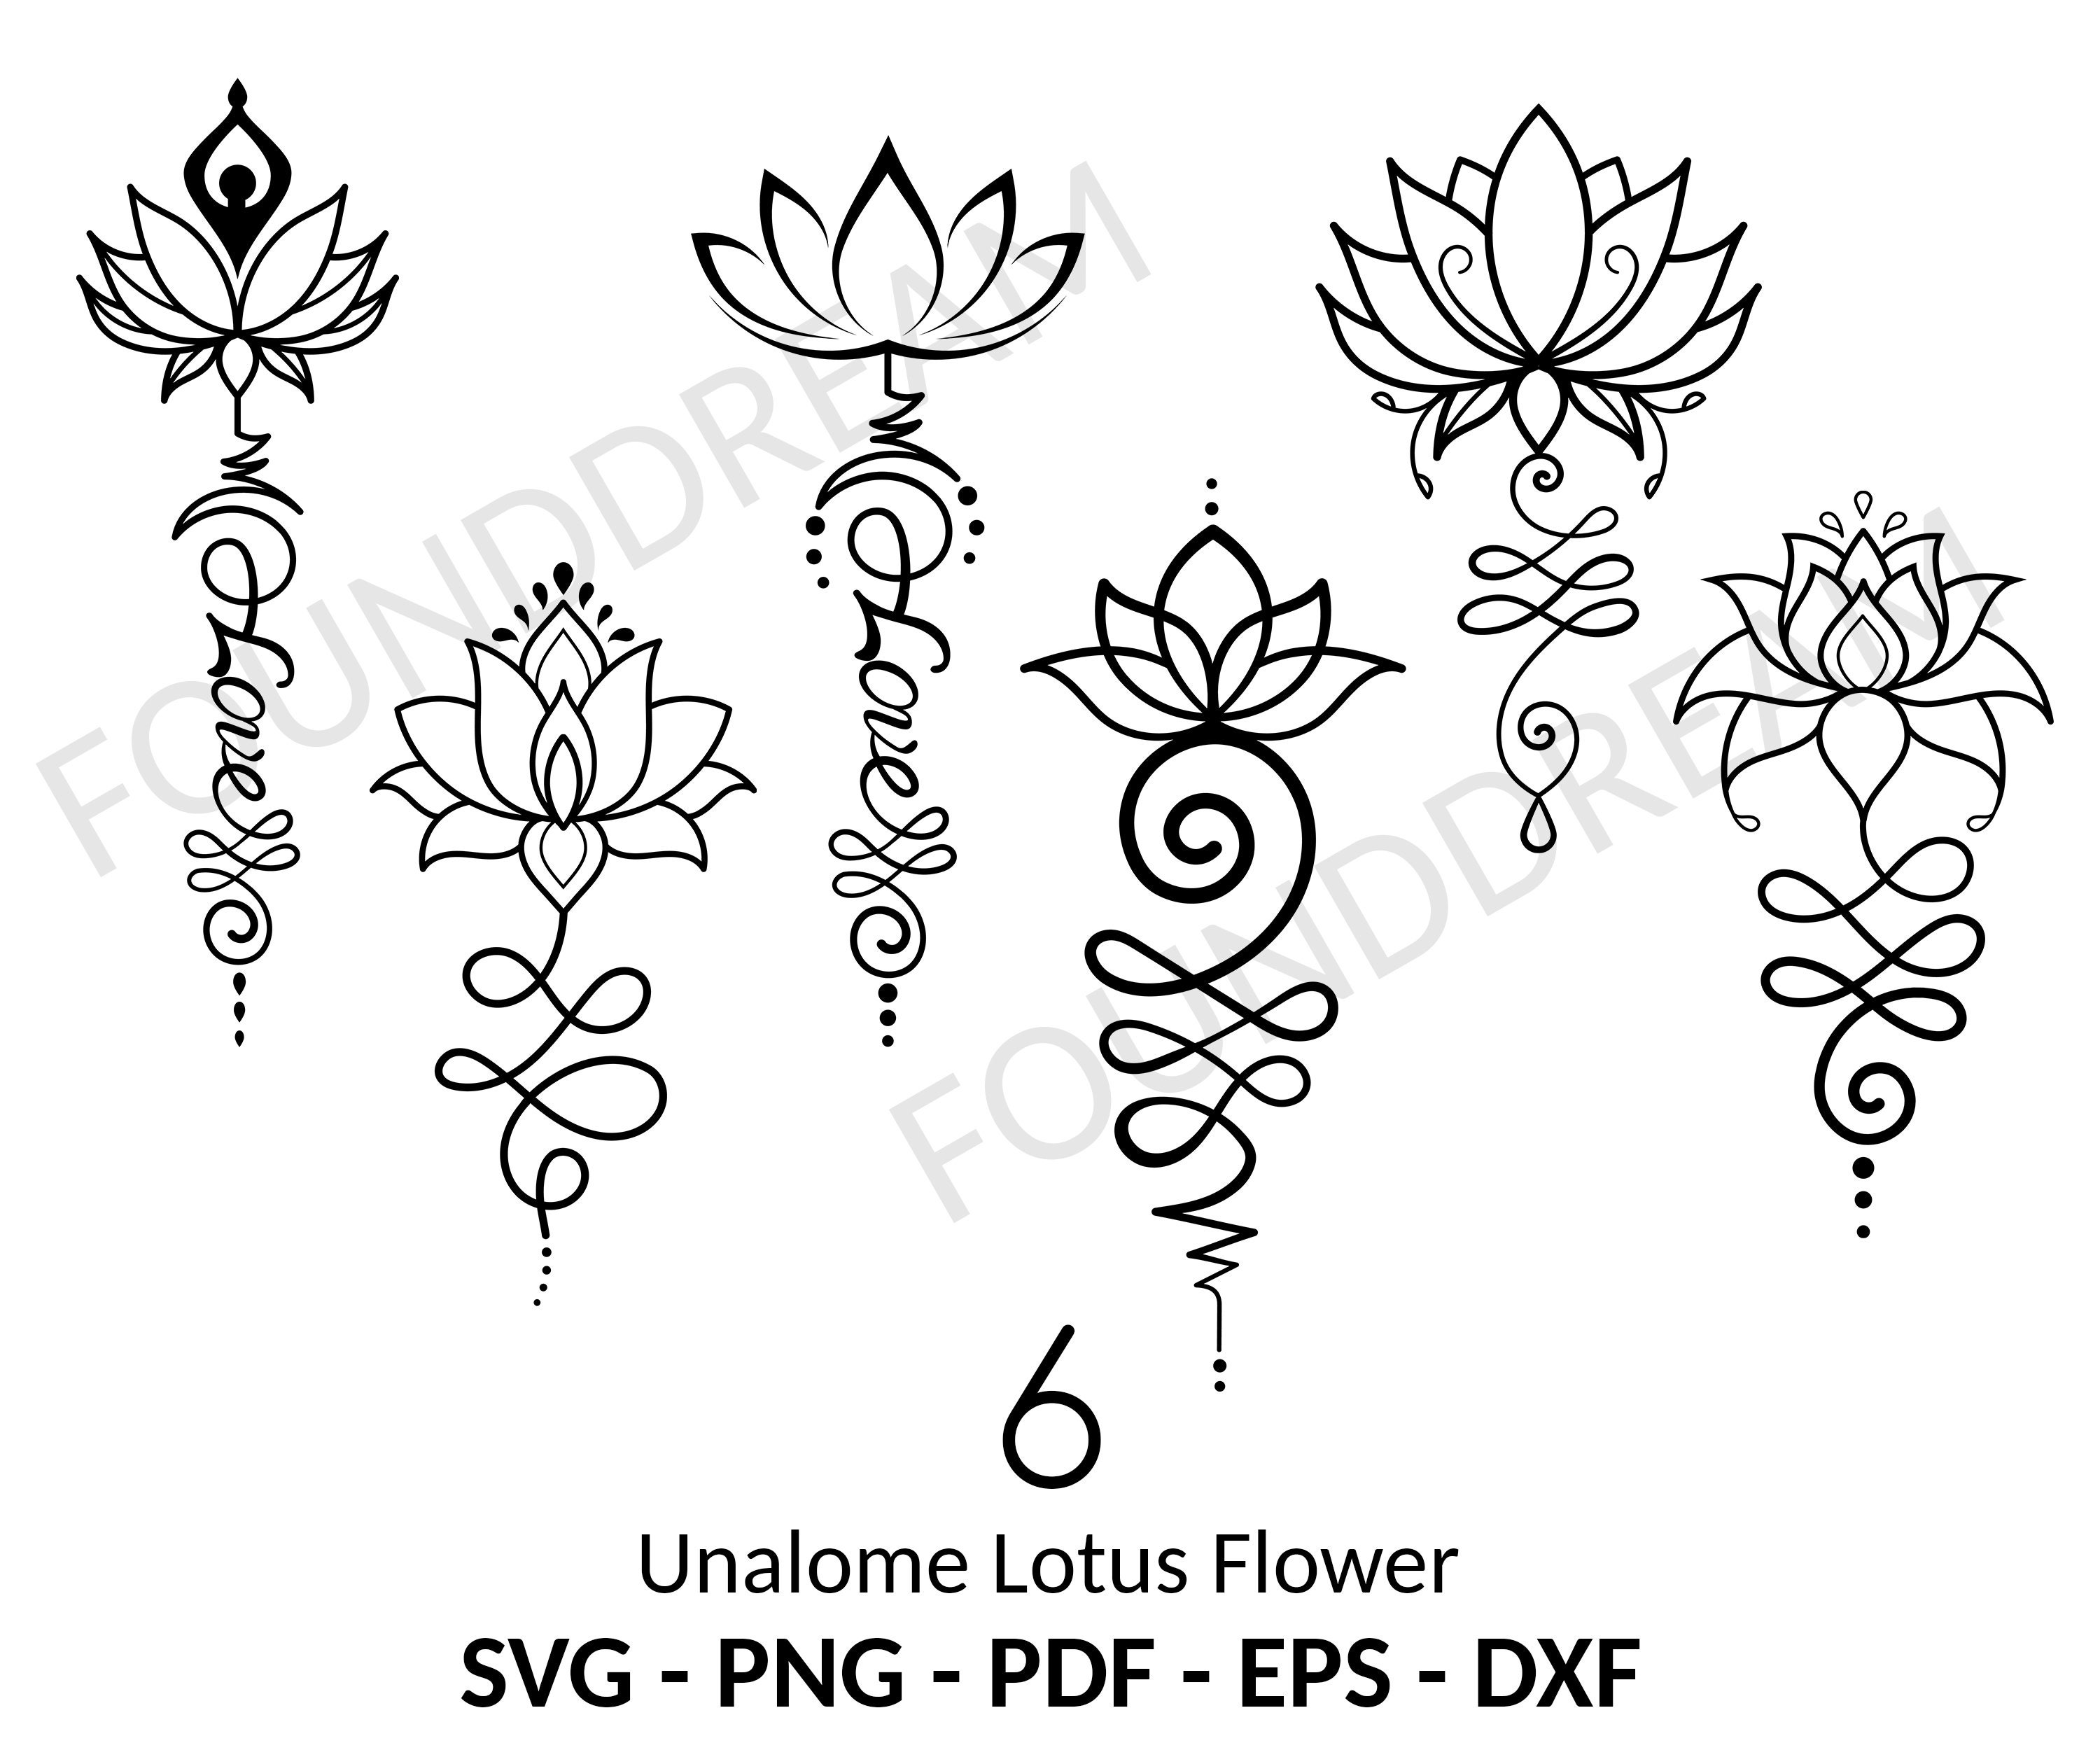 Unalome Lotus Moon Tattoo Meaning - wide 2